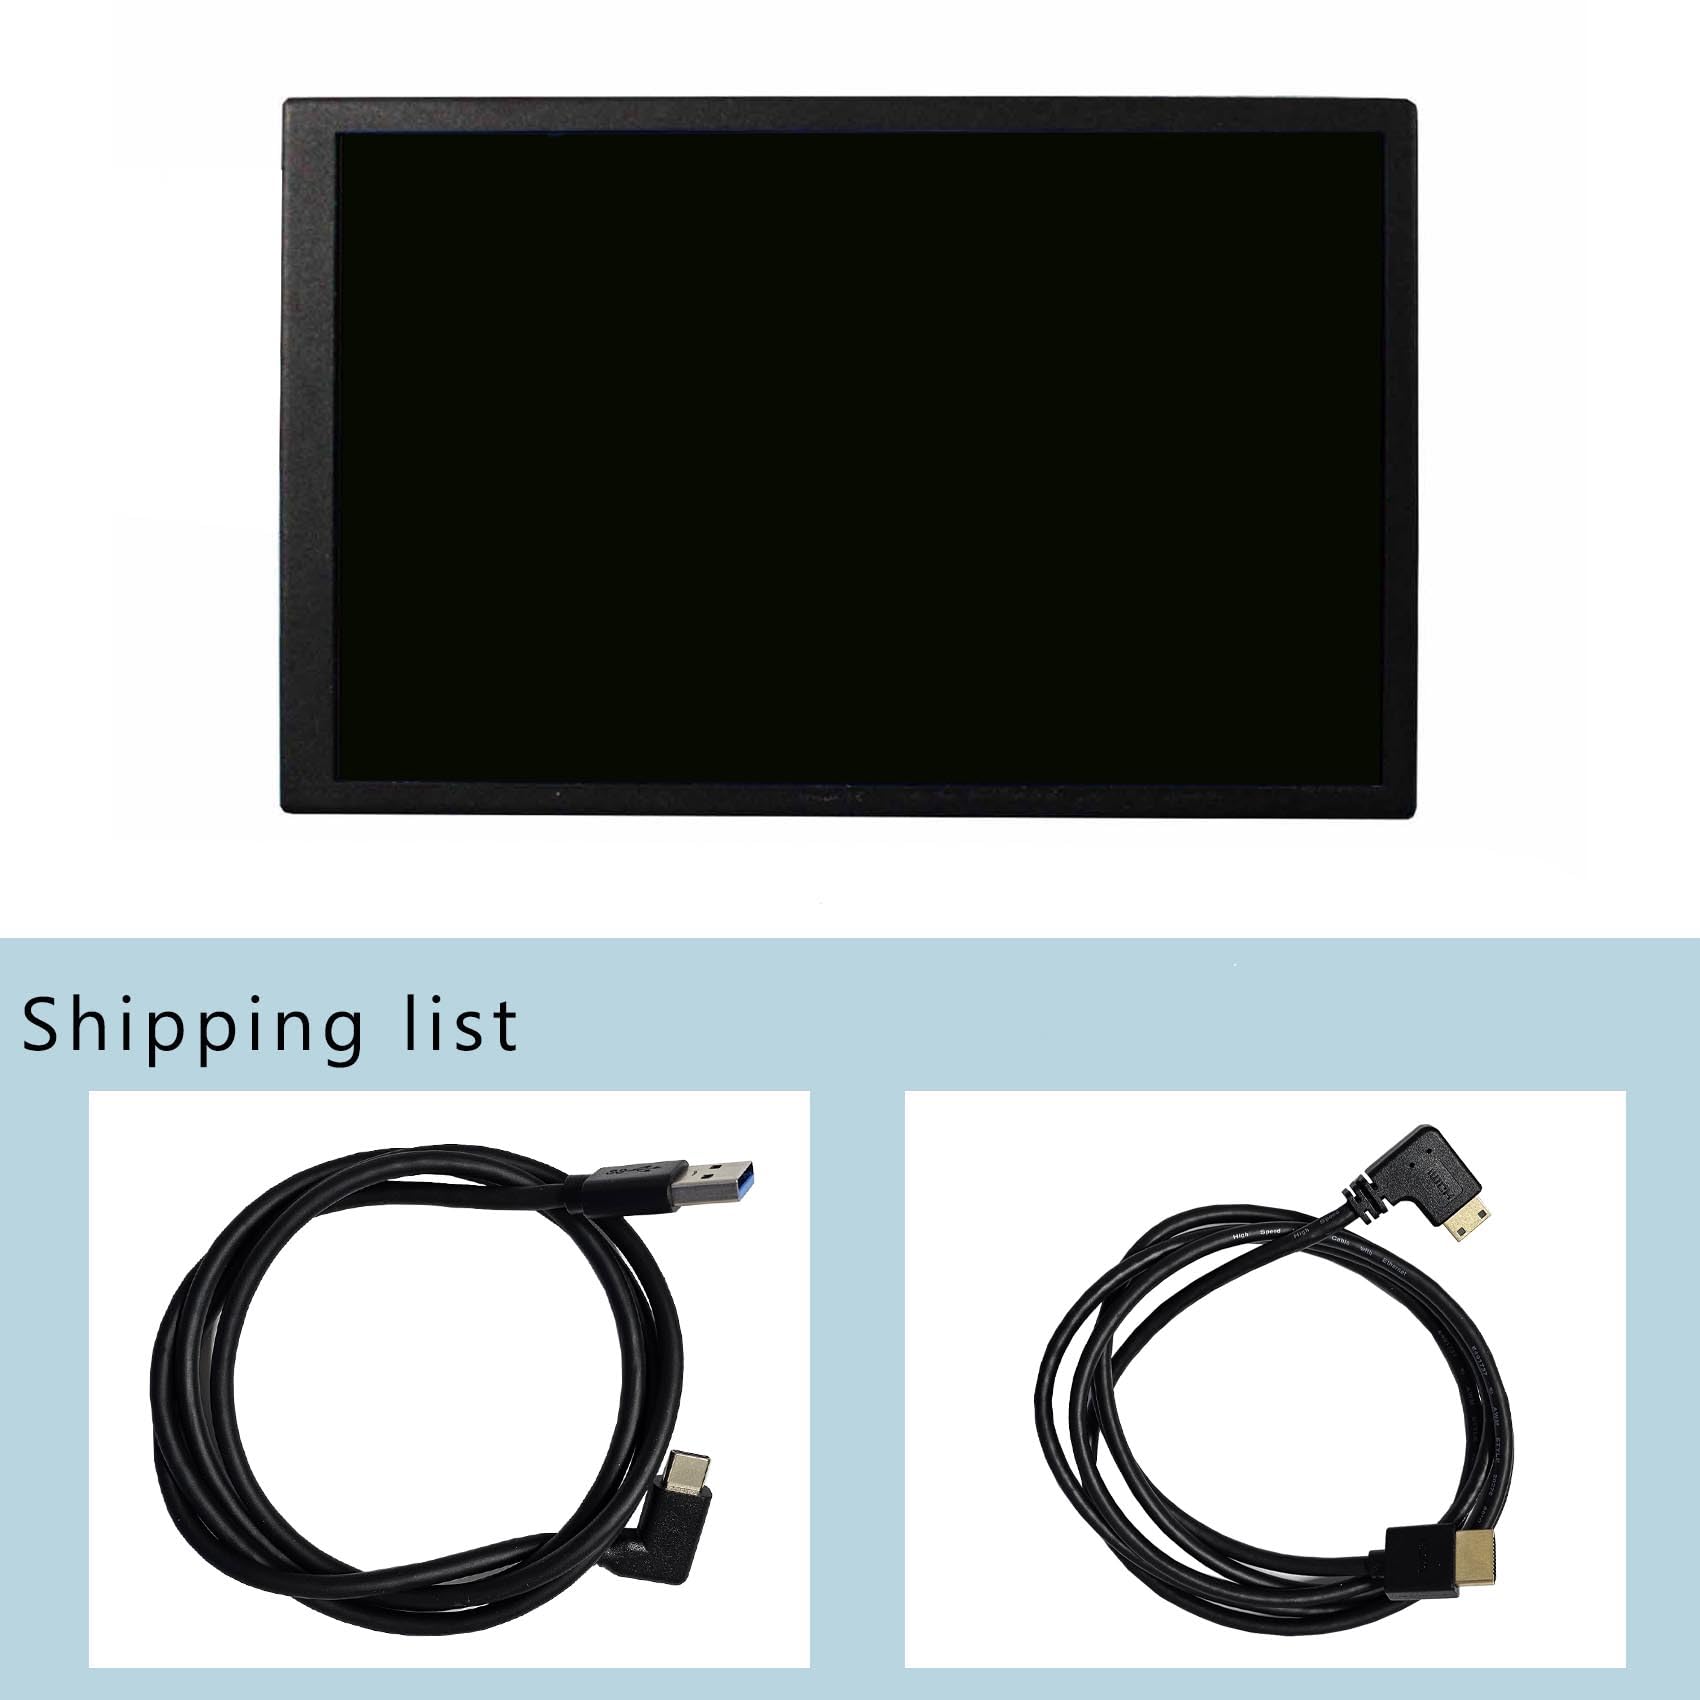 VSDISPLAY 8 Inch 1280x800 Small LCD Monitor Support Mini HD-MI Video Input Portable Display for DIY PC Case/Laptop/Computer